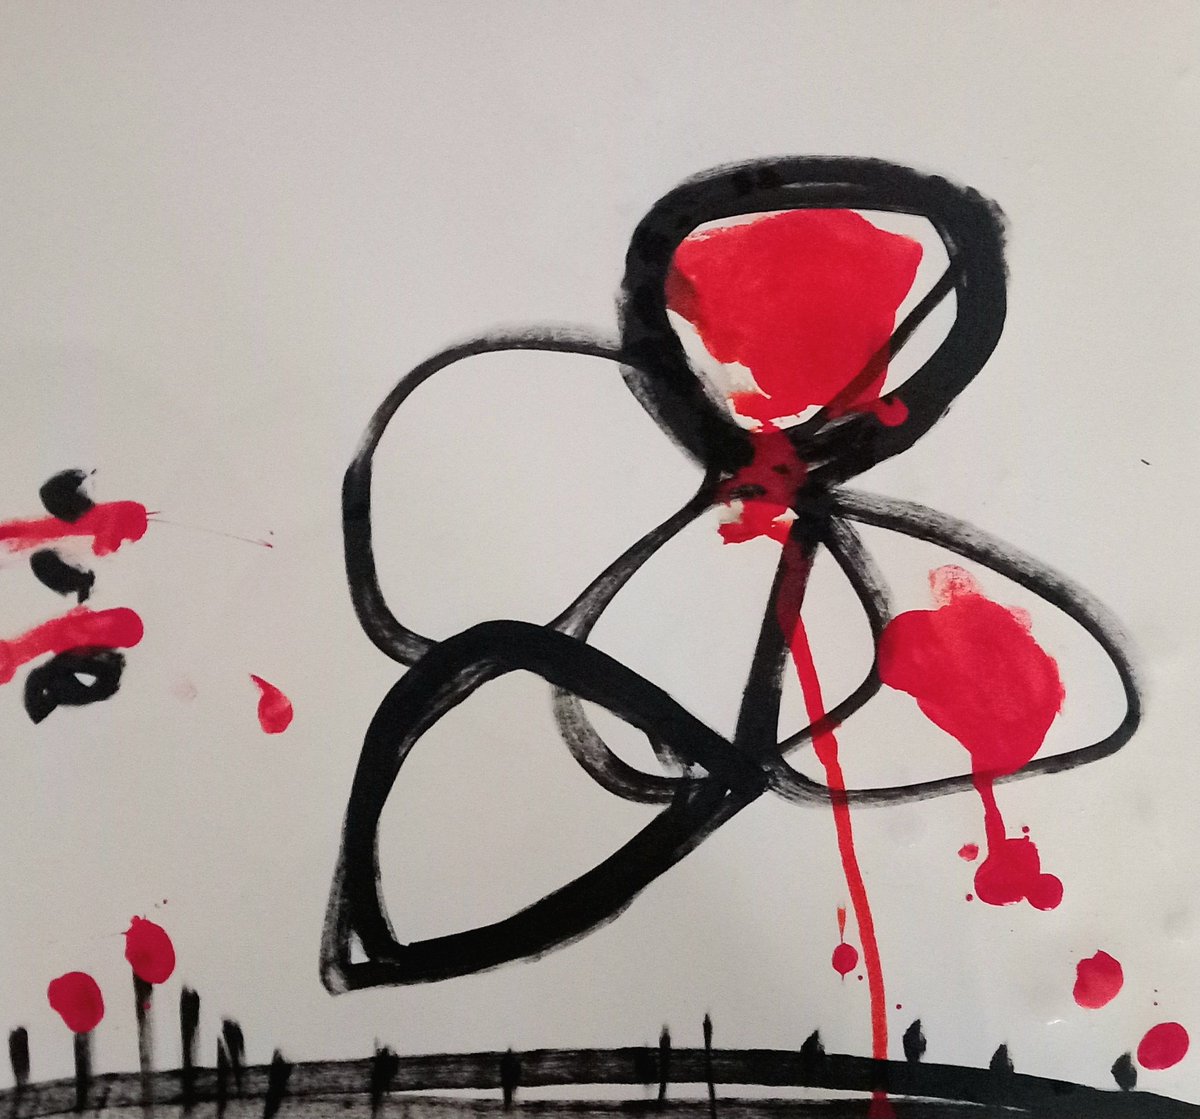 #draweveryday #everyday '  #giant #flower #kite in the evening ' #molotow pen and #red ink on paper #abstract #strange #art